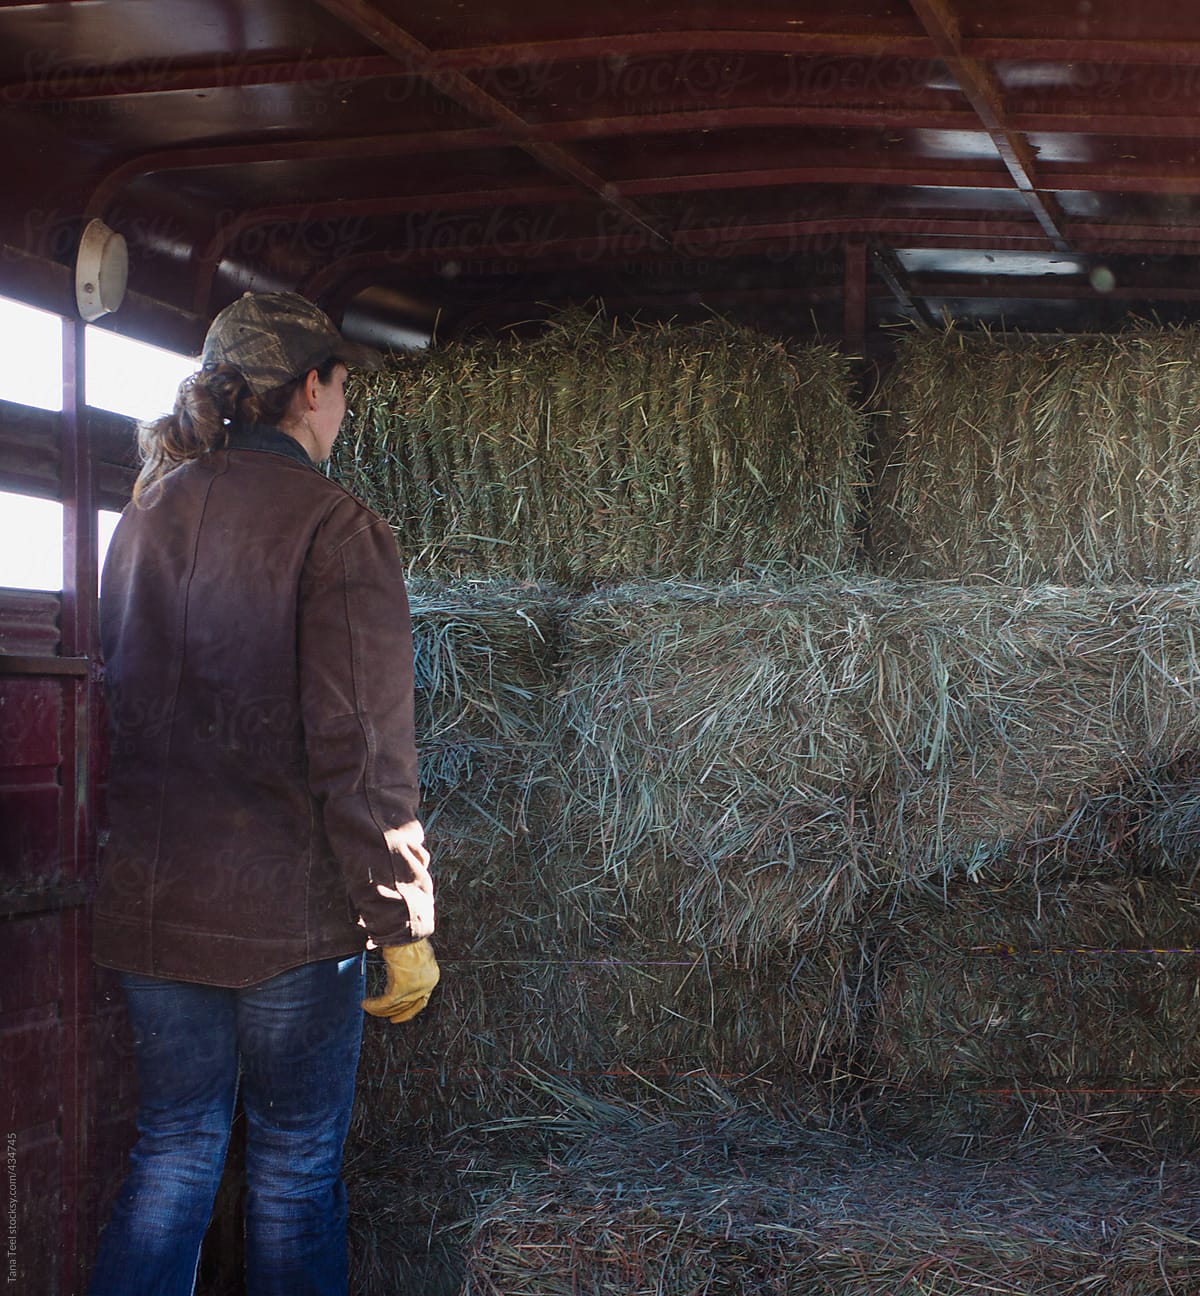 Farm girl standing by stacks of hay bales inside trailer